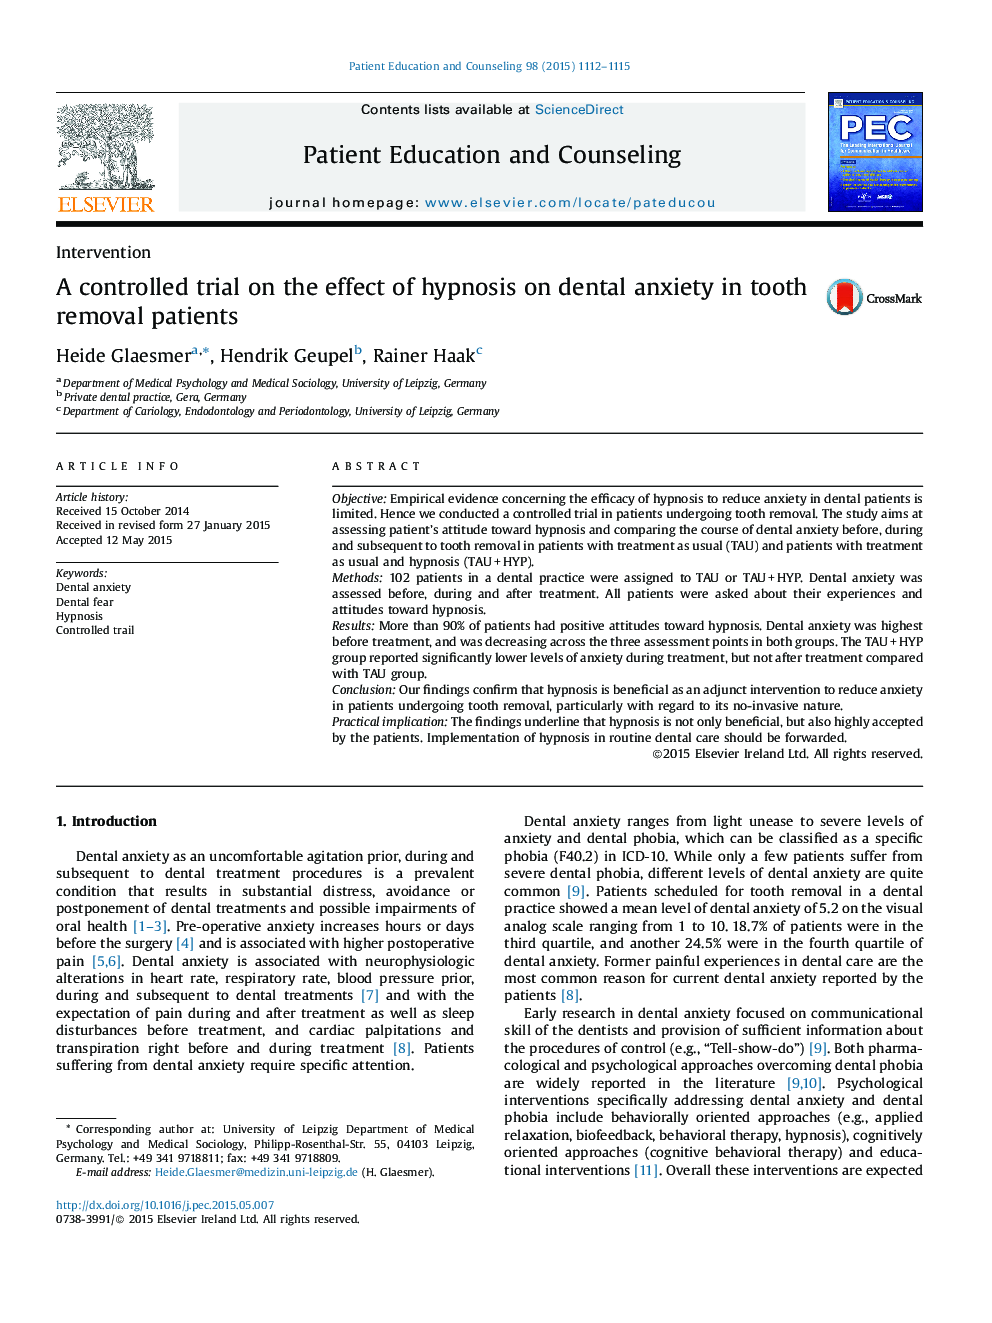 A controlled trial on the effect of hypnosis on dental anxiety in tooth removal patients